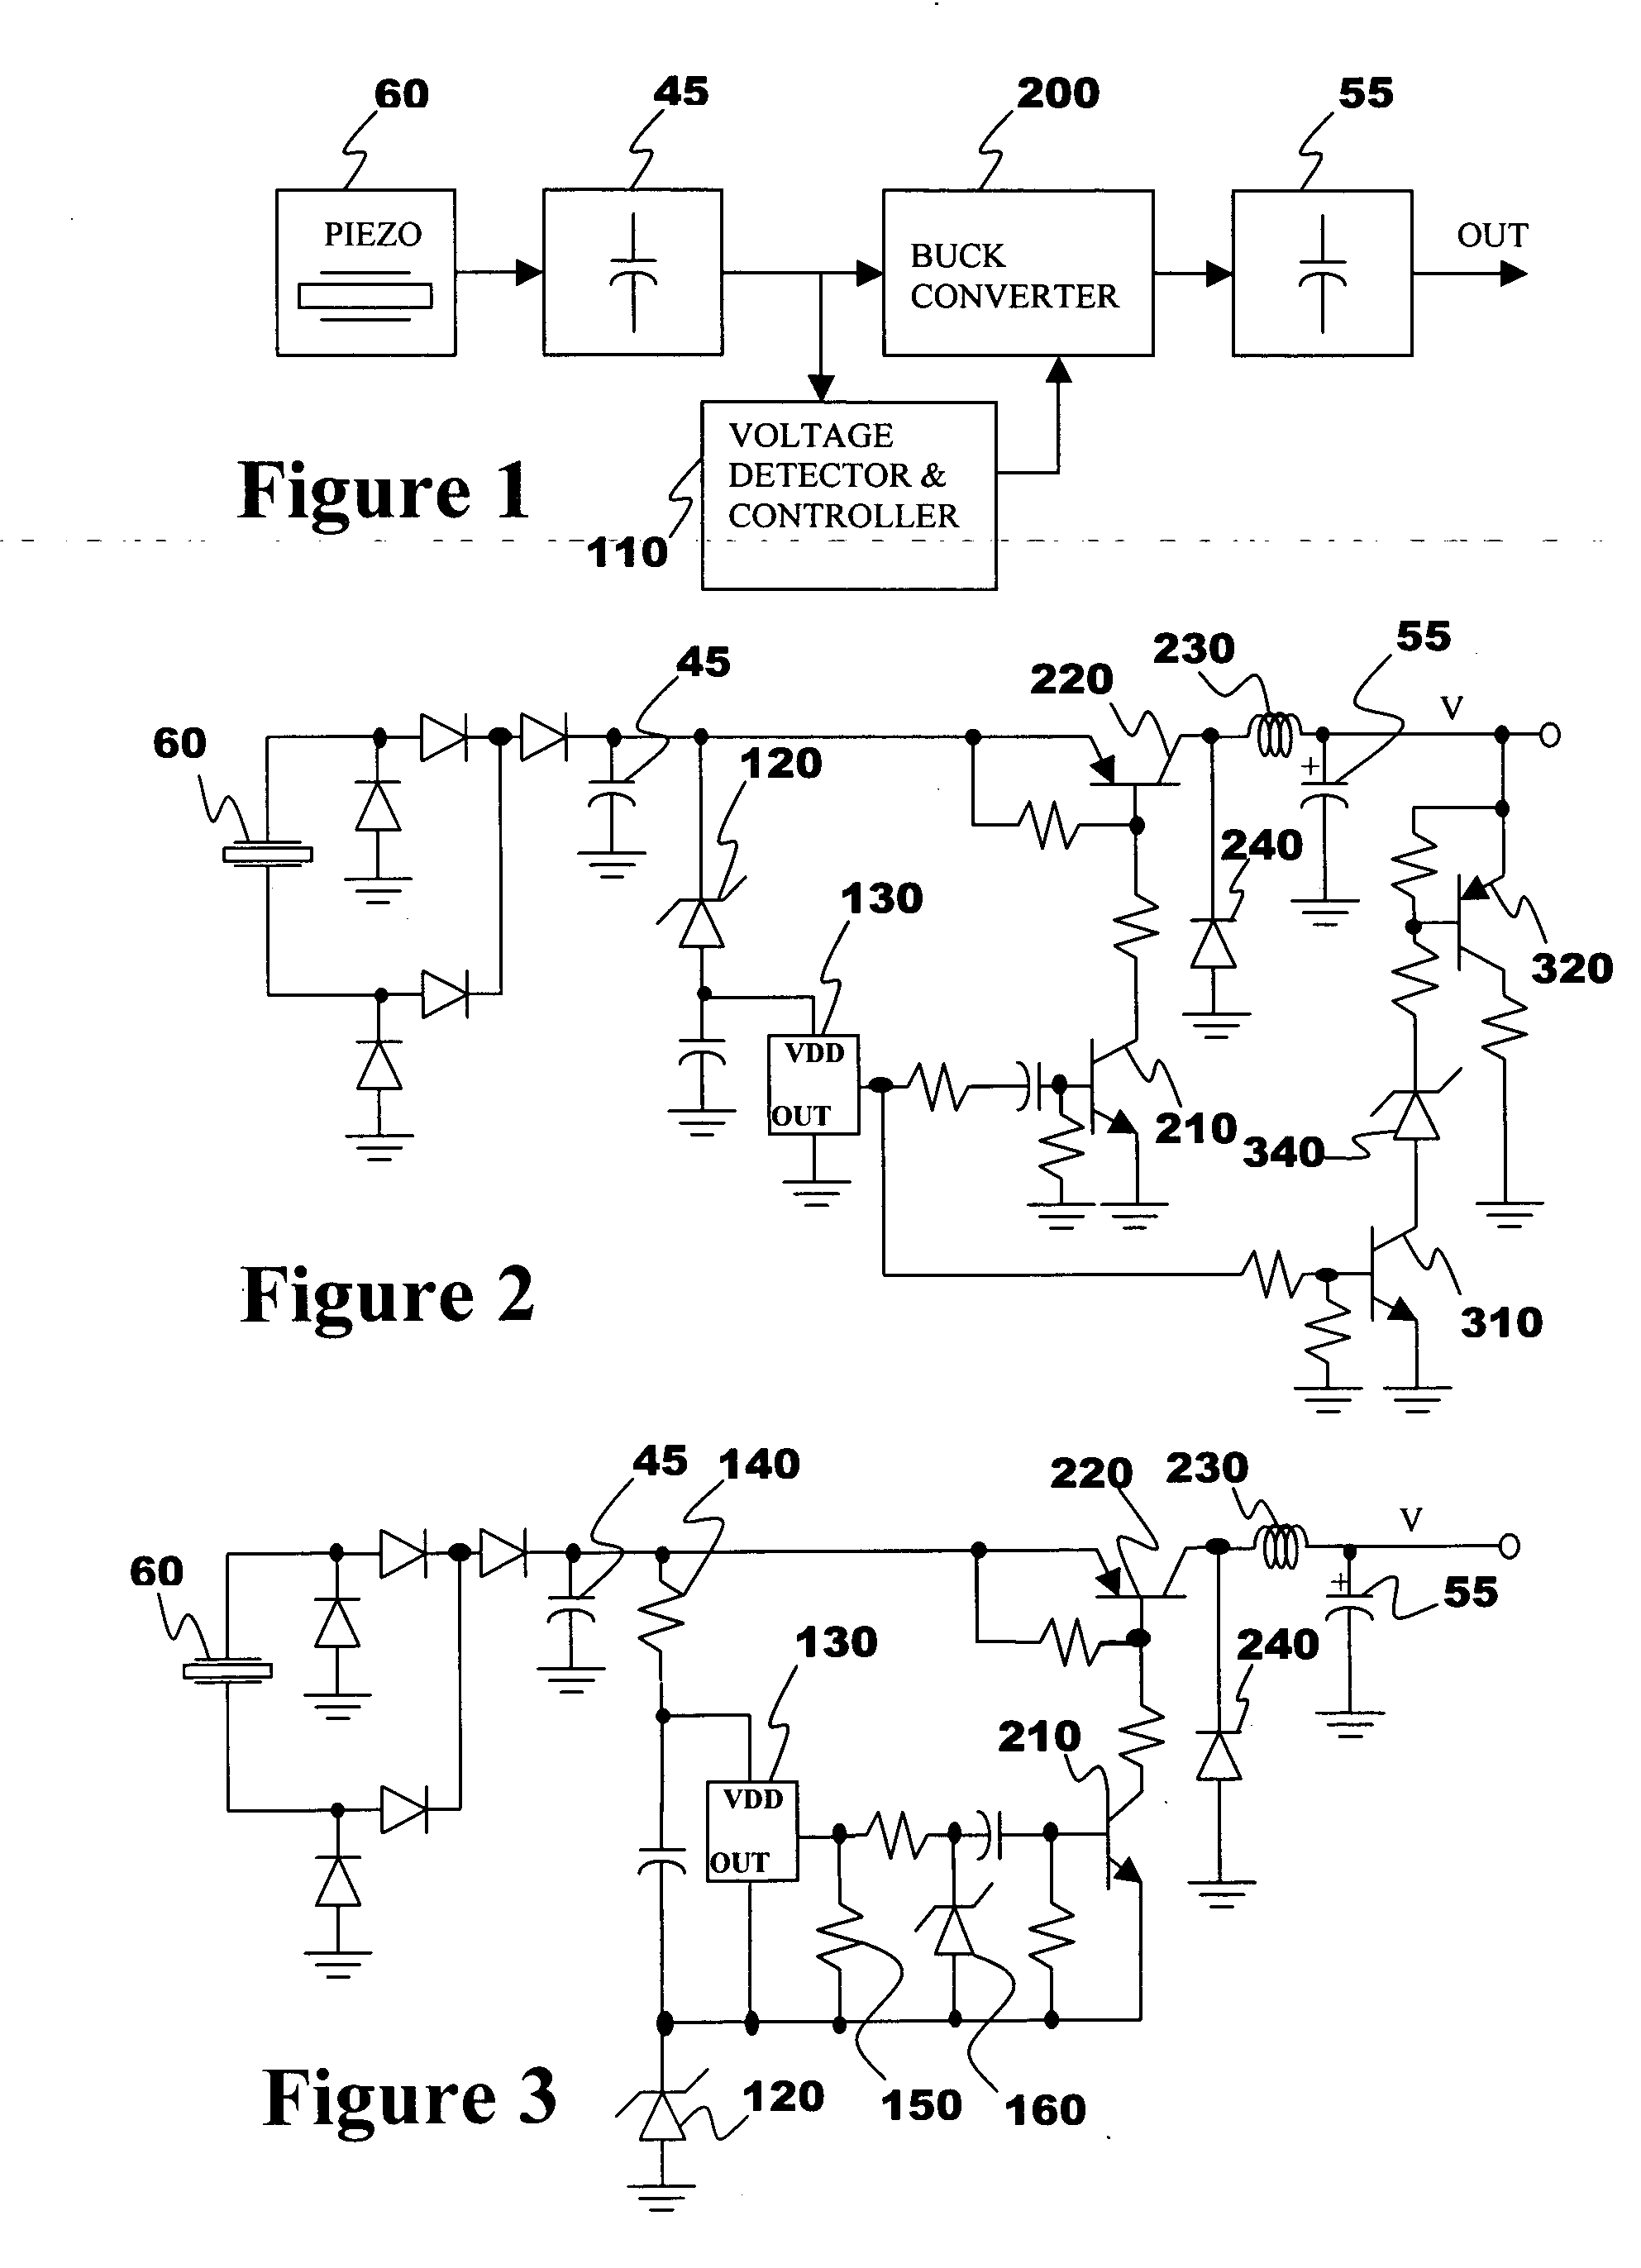 Power conversion from piezoelectric source